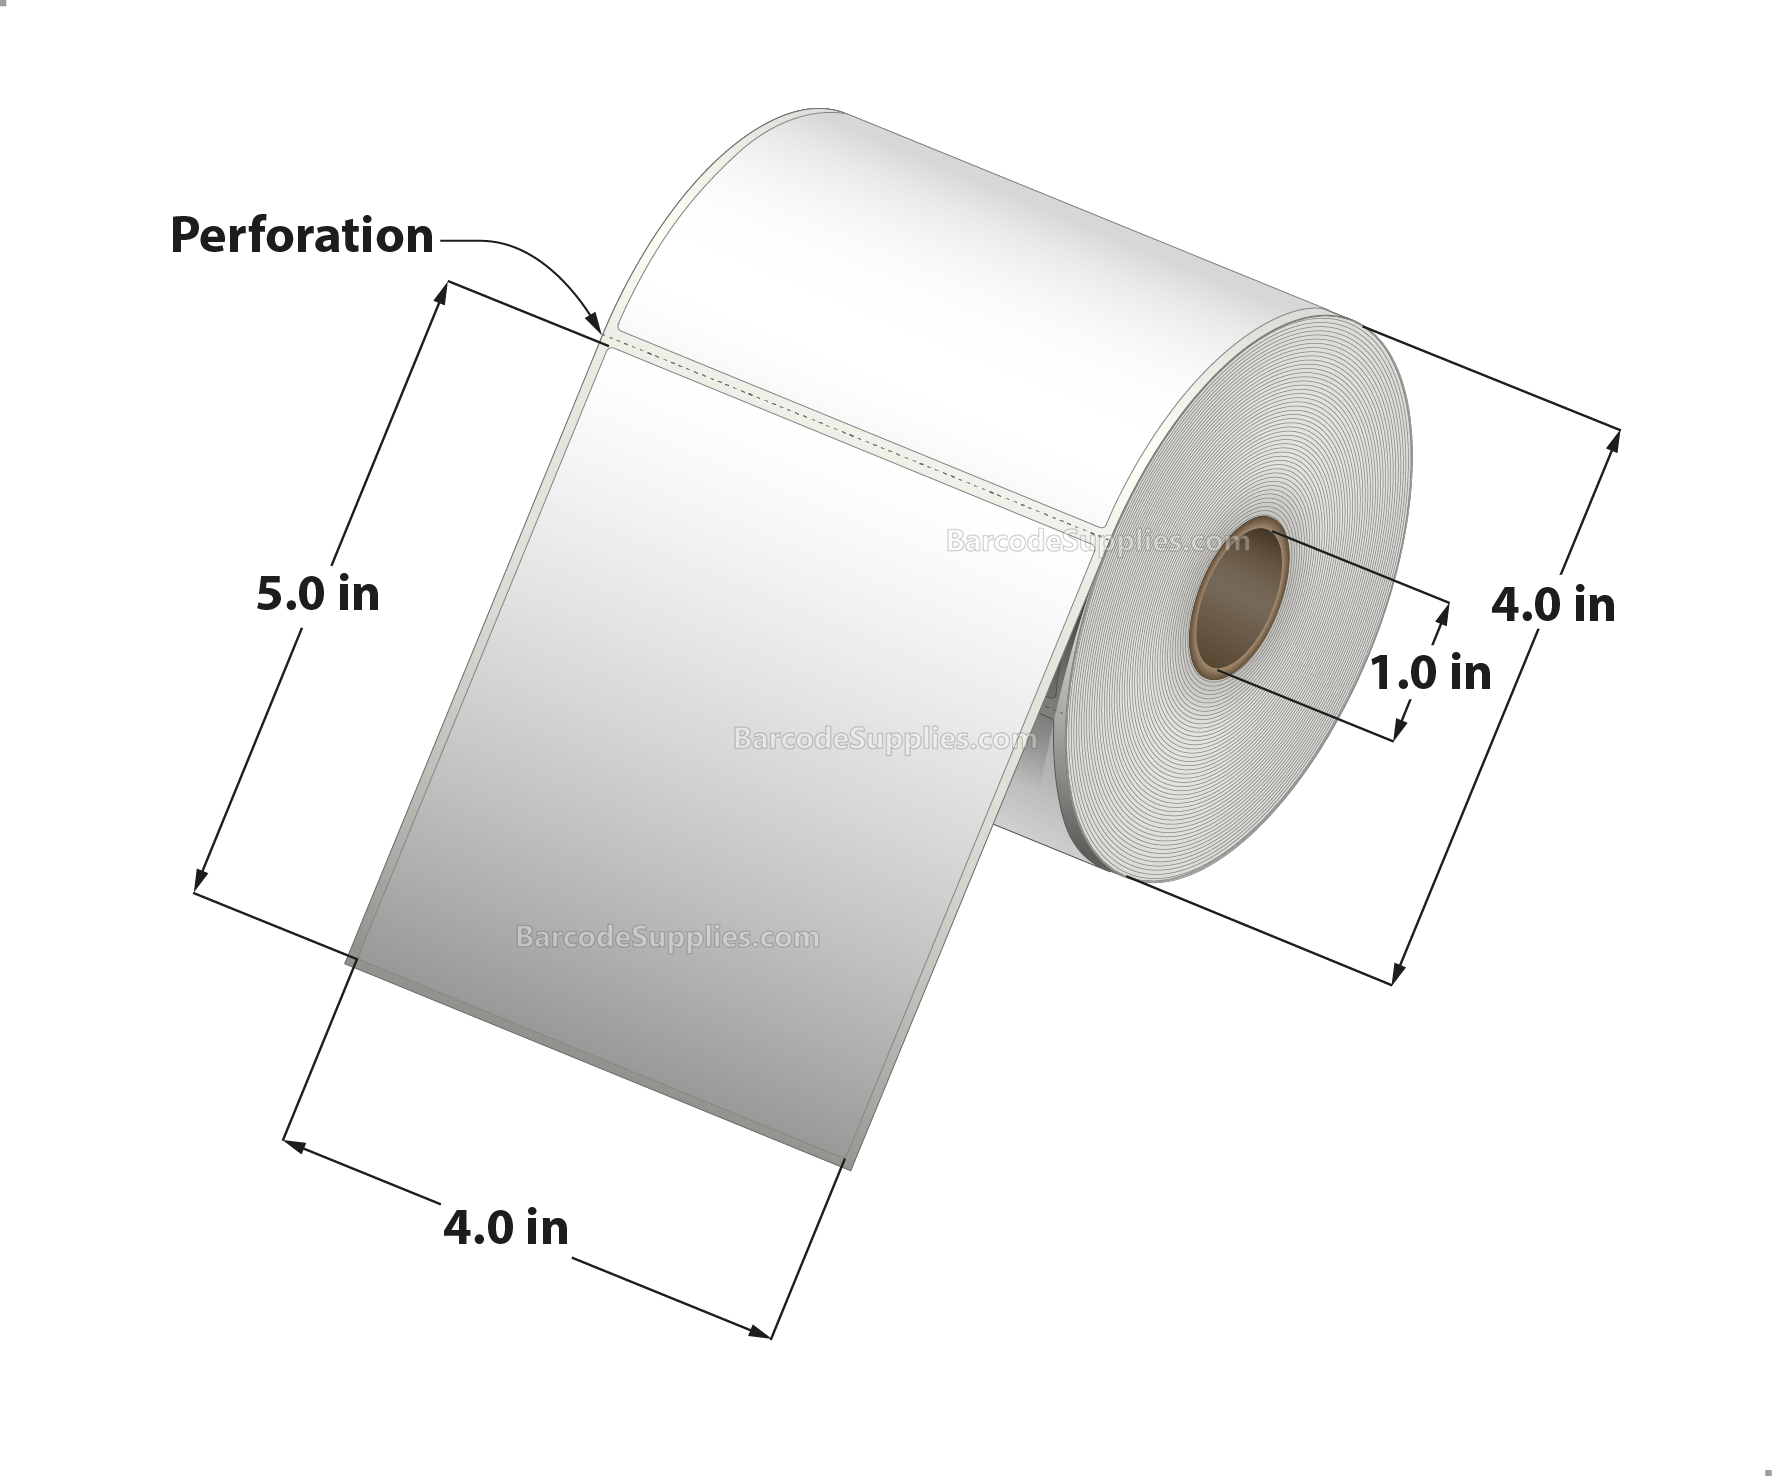 4 x 5 Direct Thermal White Labels With Rubber Adhesive - Perforated - 305 Labels Per Roll - Carton Of 12 Rolls - 3660 Labels Total - MPN: RDT4-400500-1P